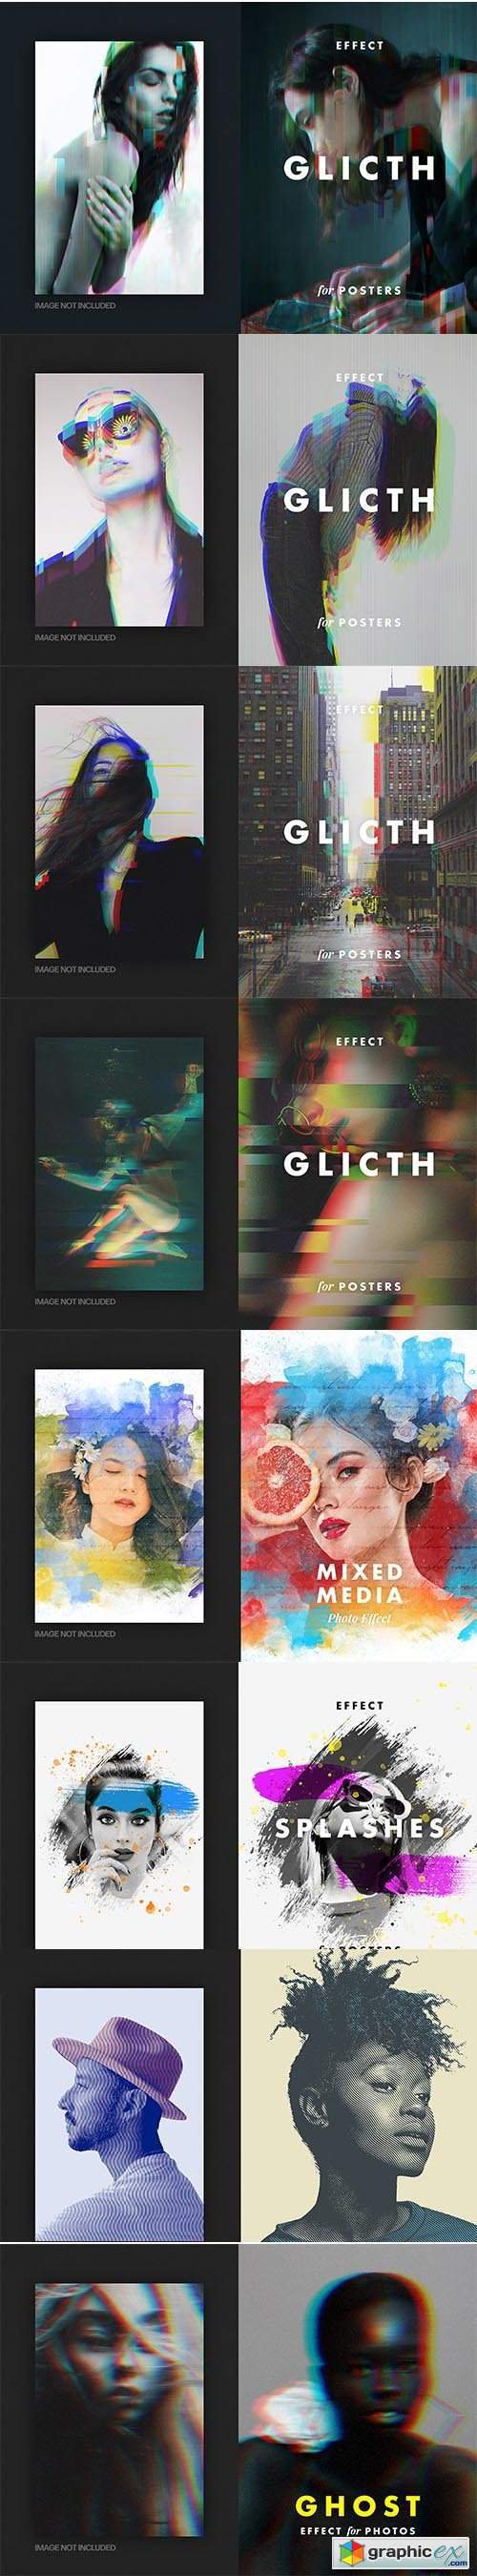 Glitch noise photo effect for poster format